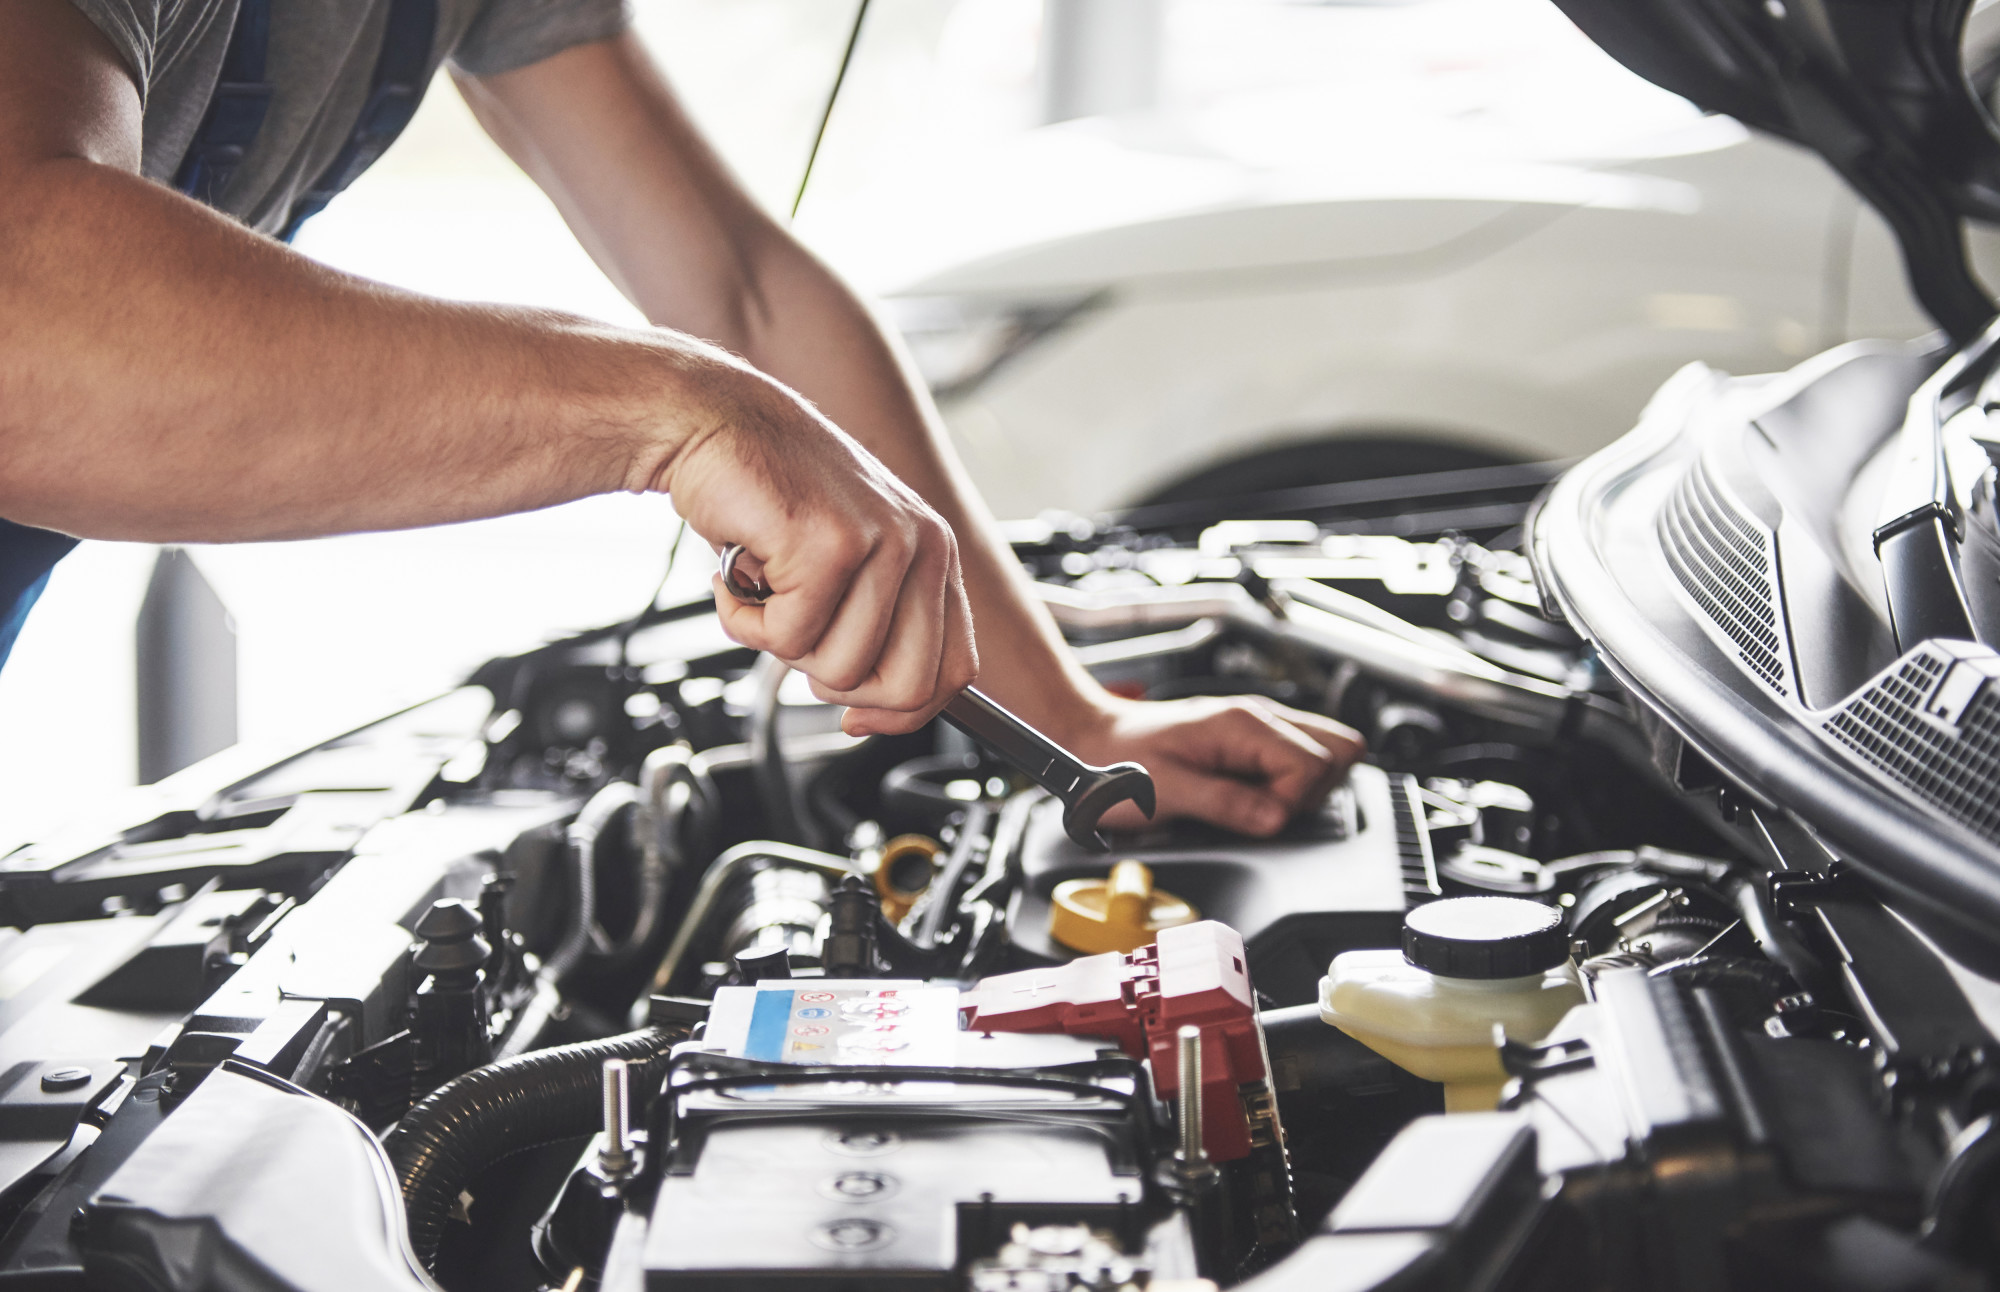 If you just bought a new car, you want to keep it in good condition! Make sure you keep reading below to learn some car maintenance tips that'll do just that.